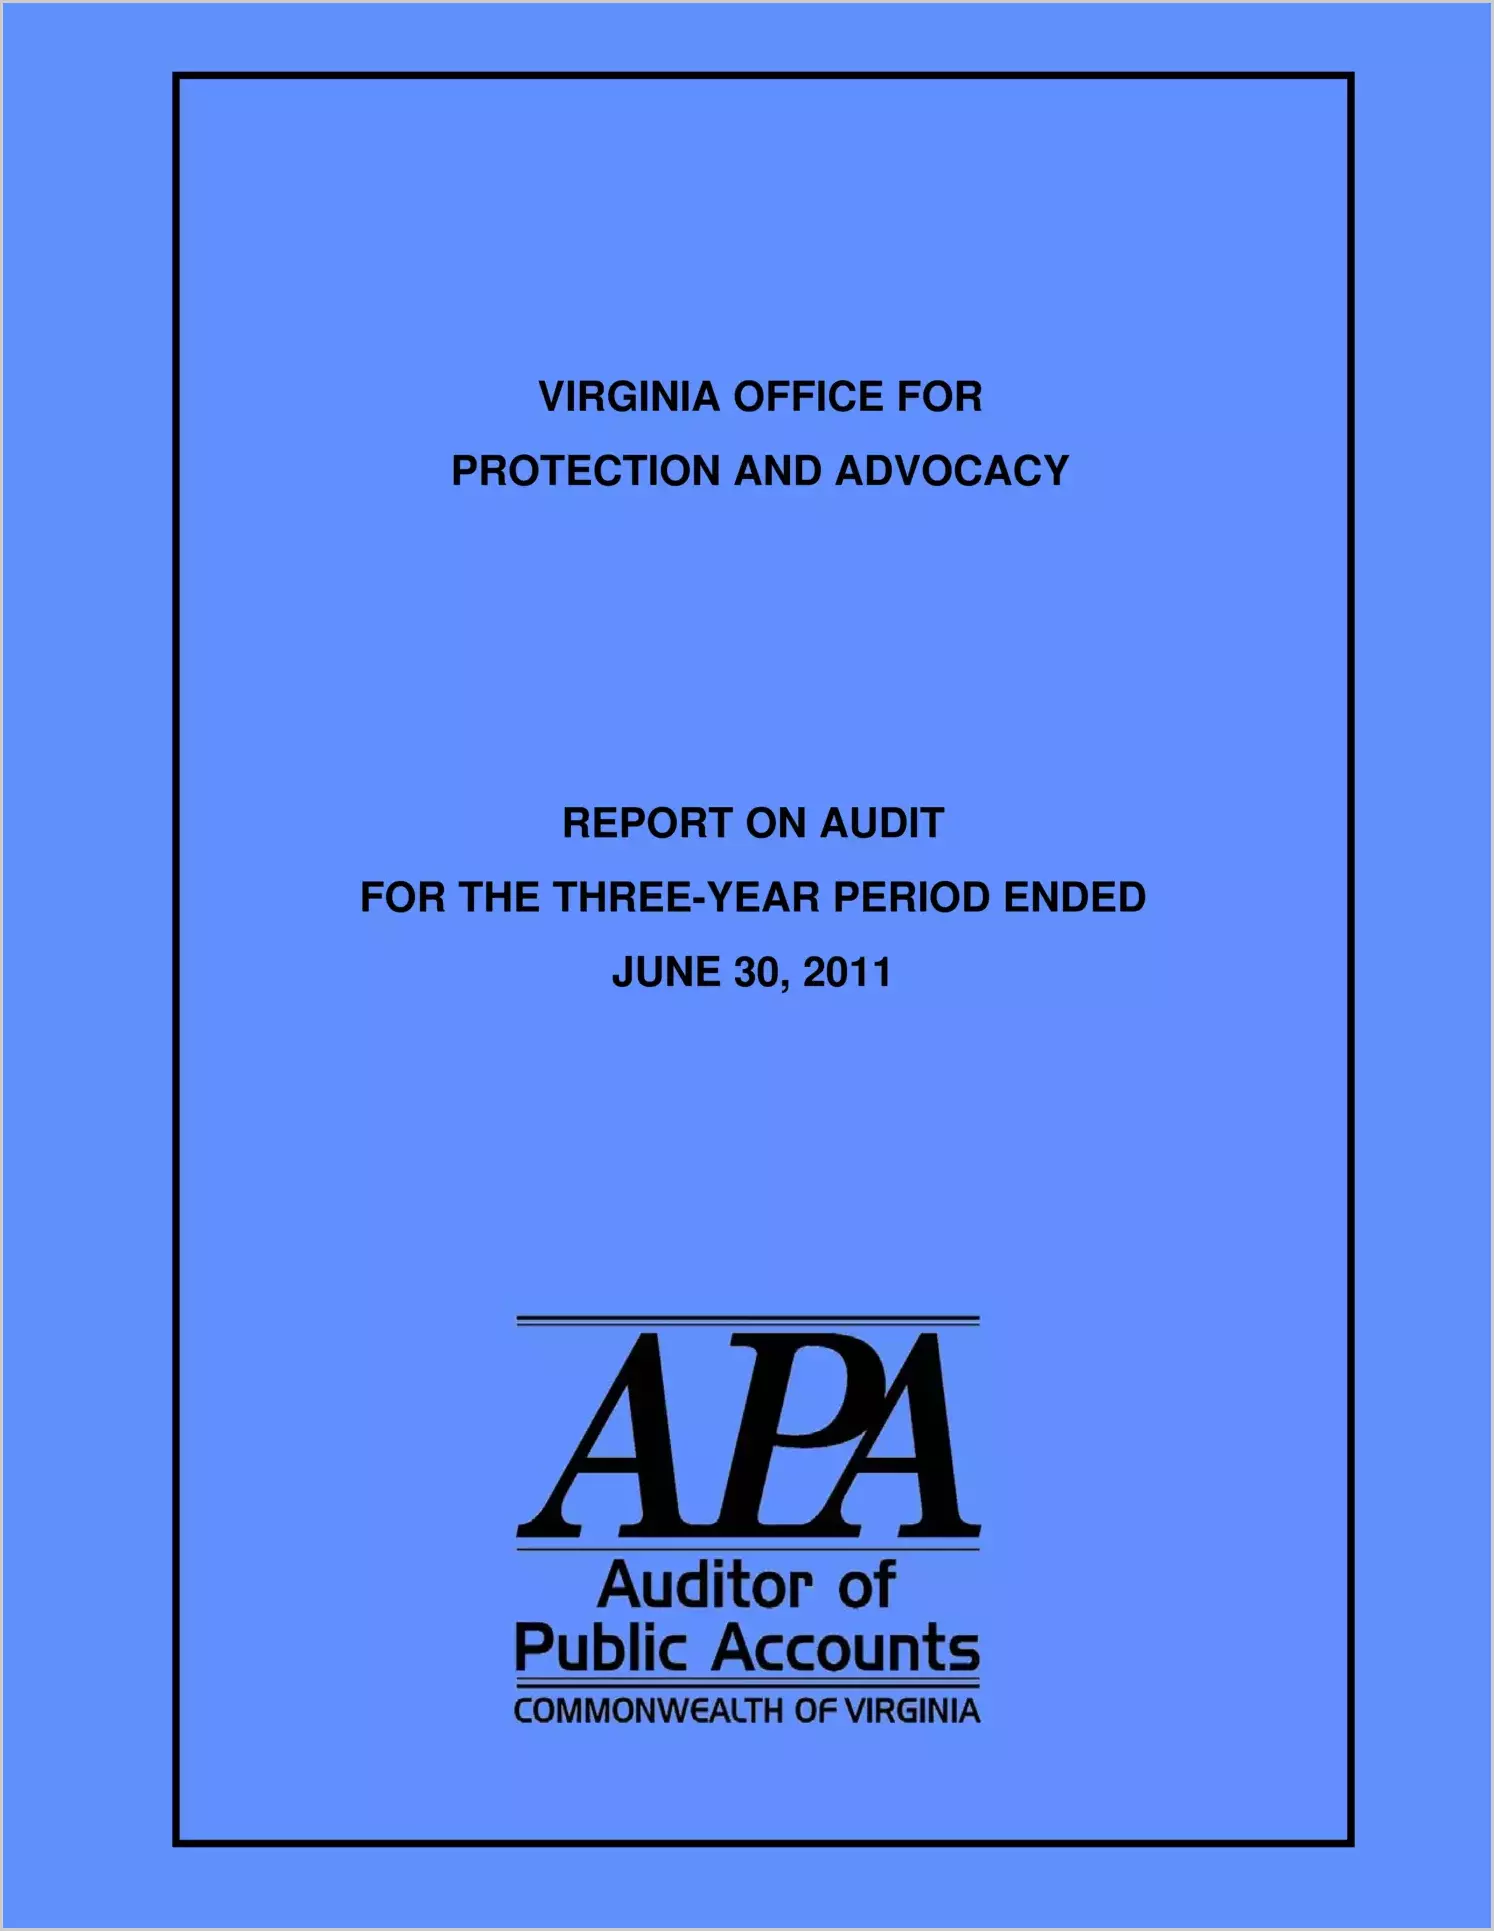 Virginia Office For Protection and Advocacy report on audit for the three-year period ended June 30, 2011